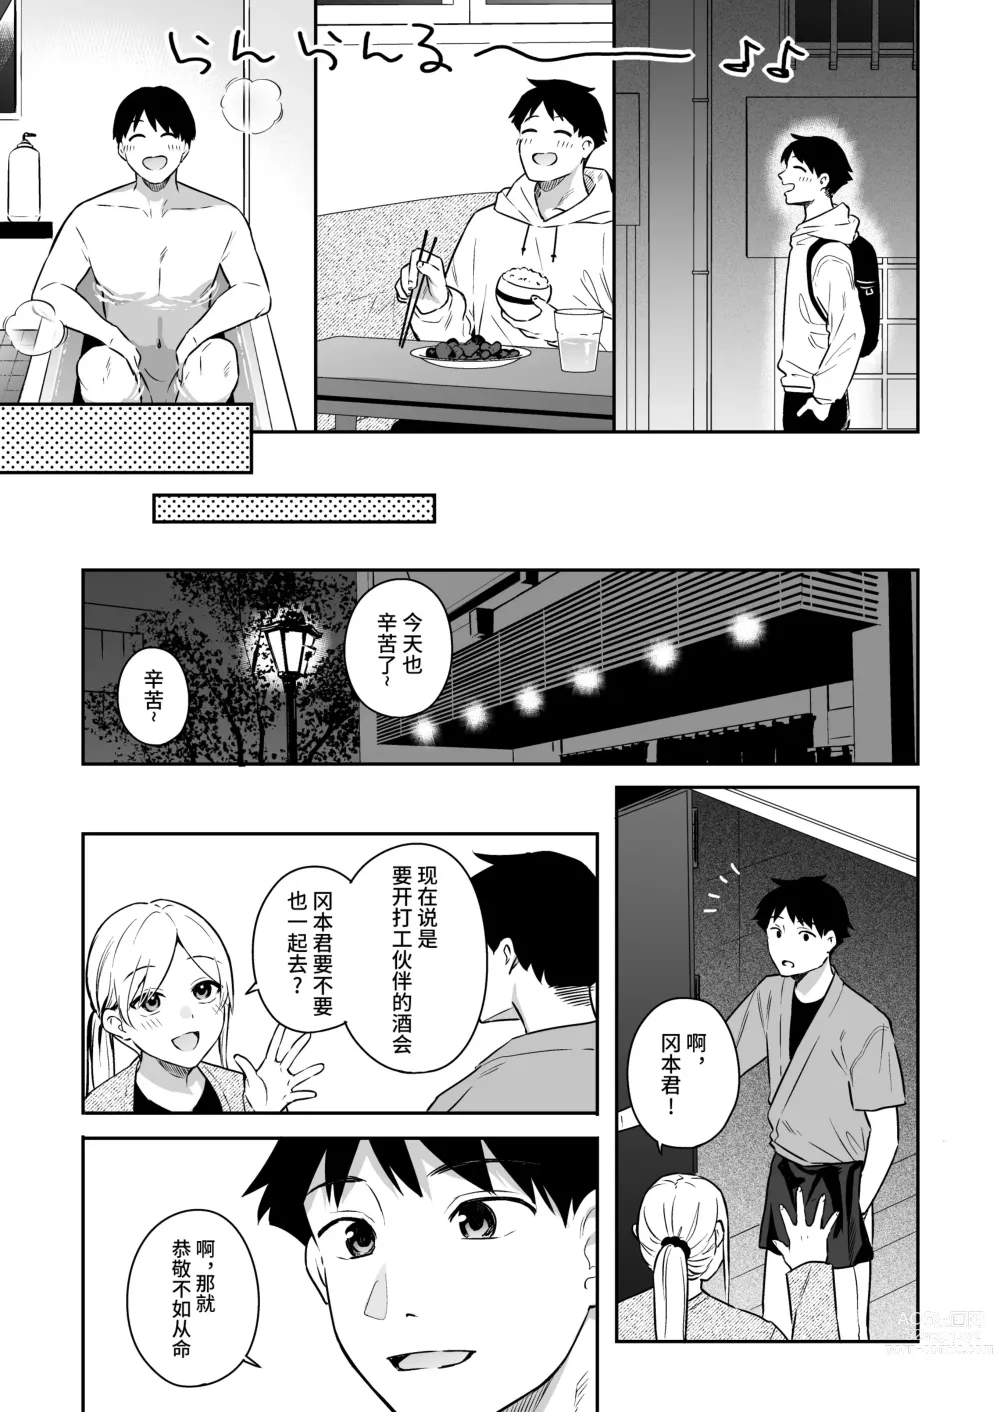 Page 7 of doujinshi 她的发情开关